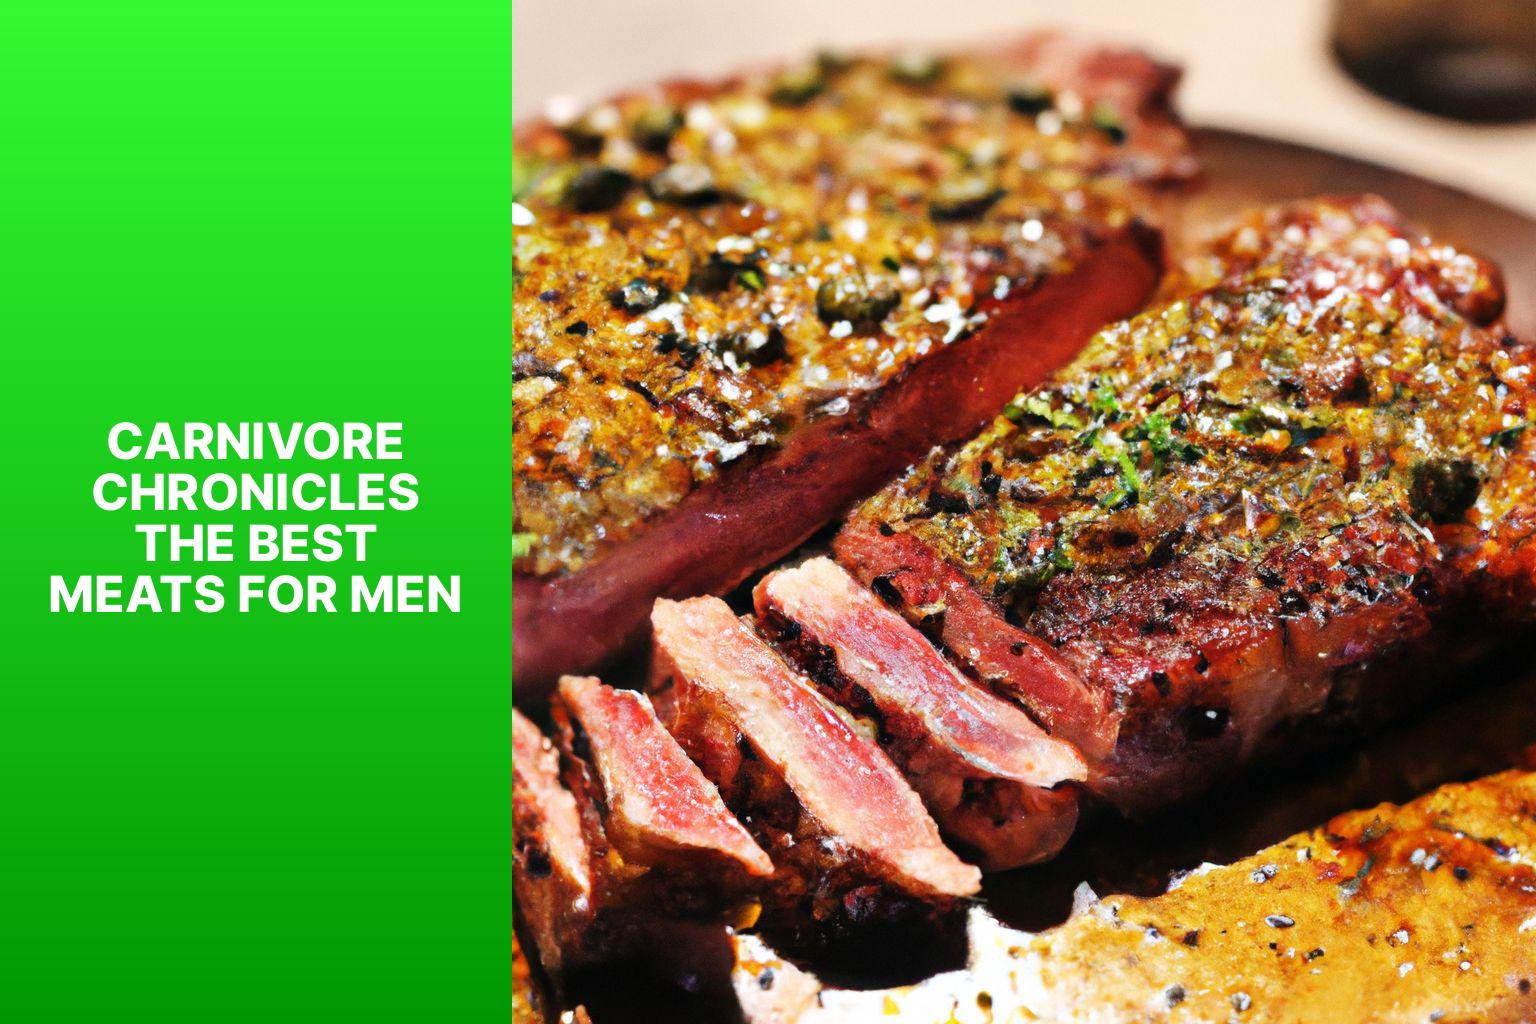 Carnivore Chronicles: The Best Meats for Men